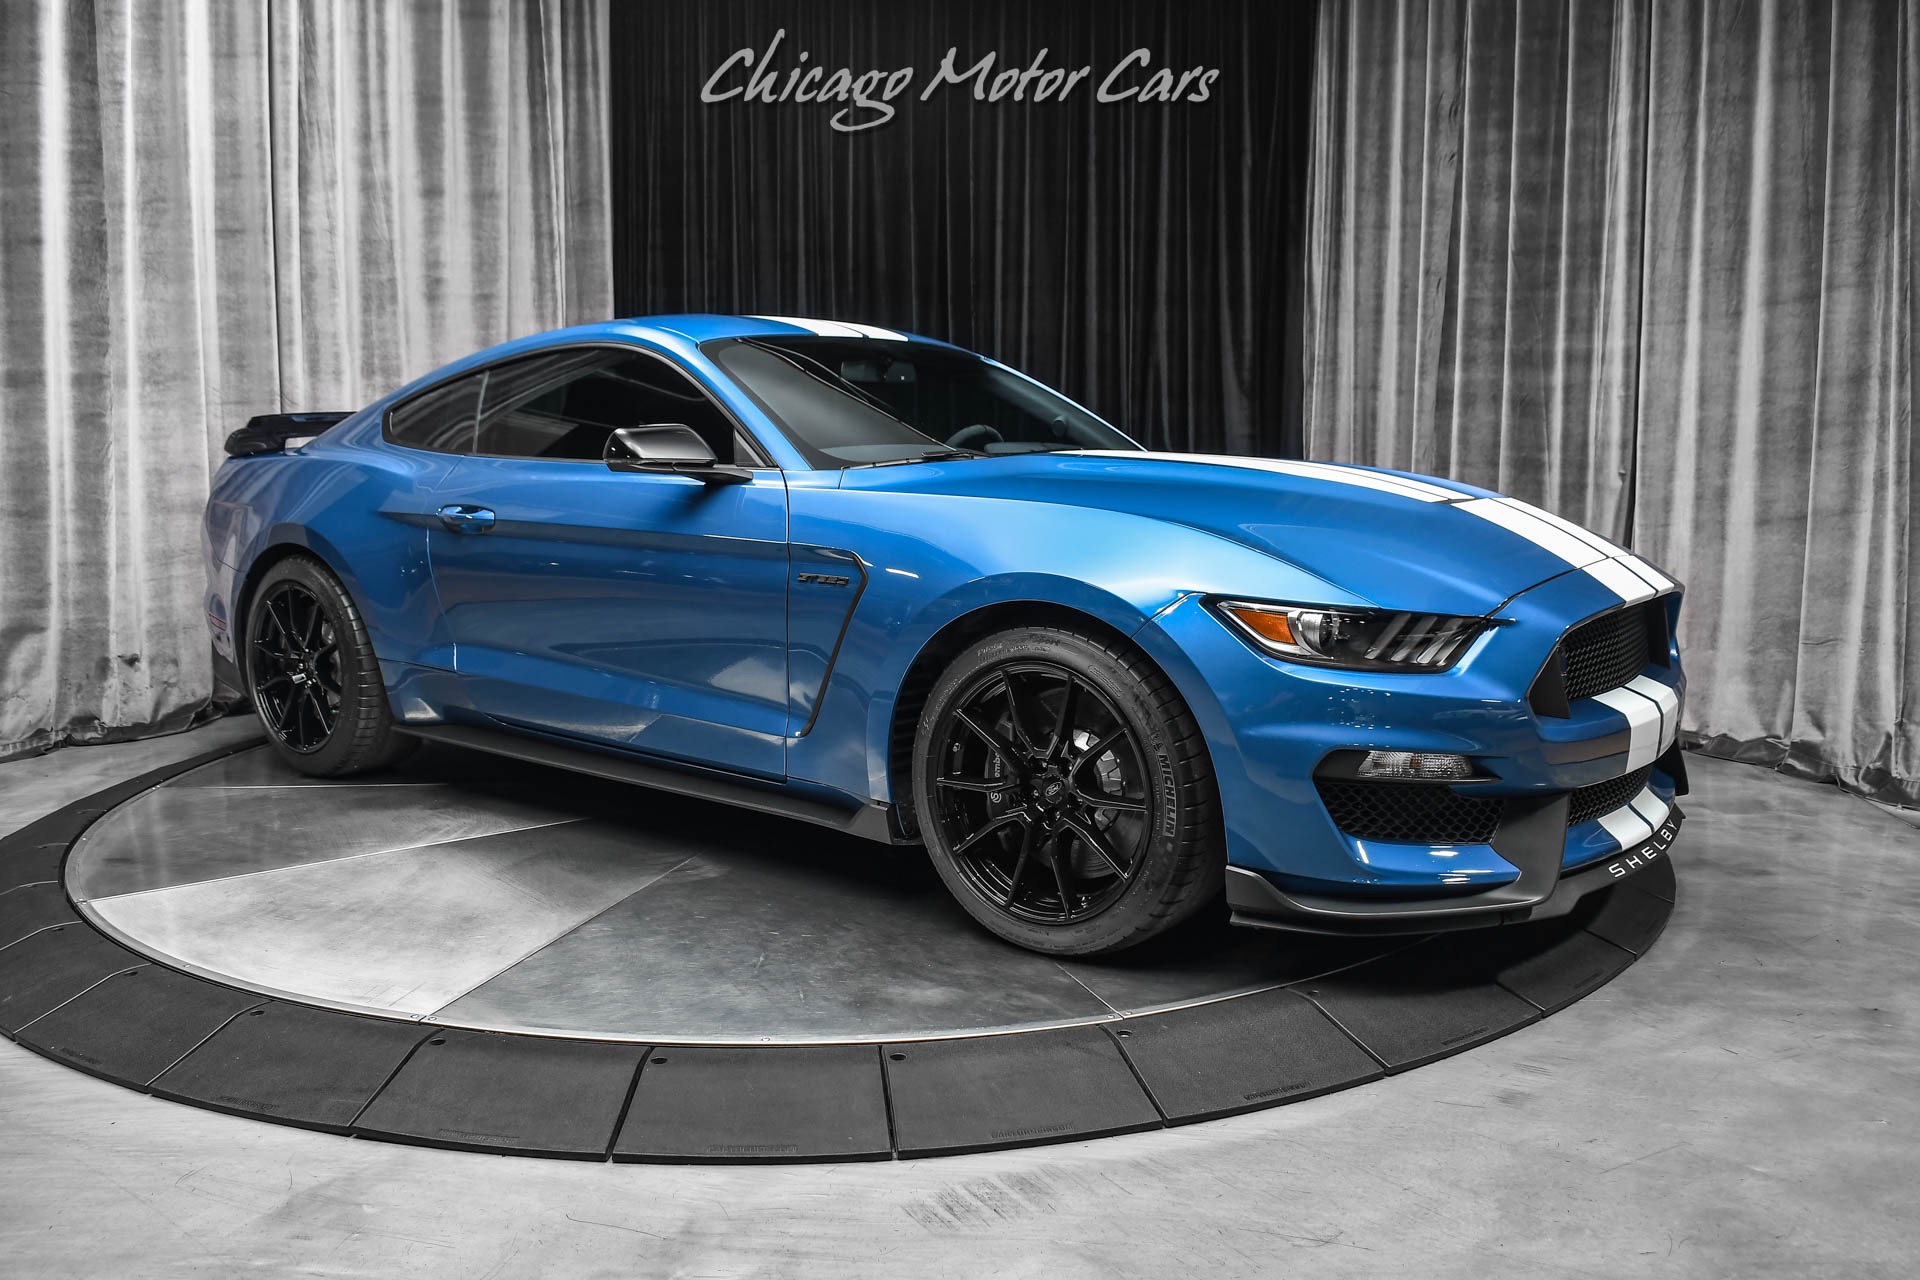 Used 2020 Ford Mustang Shelby GT350 Tech Package! 4k Miles! Handling ...